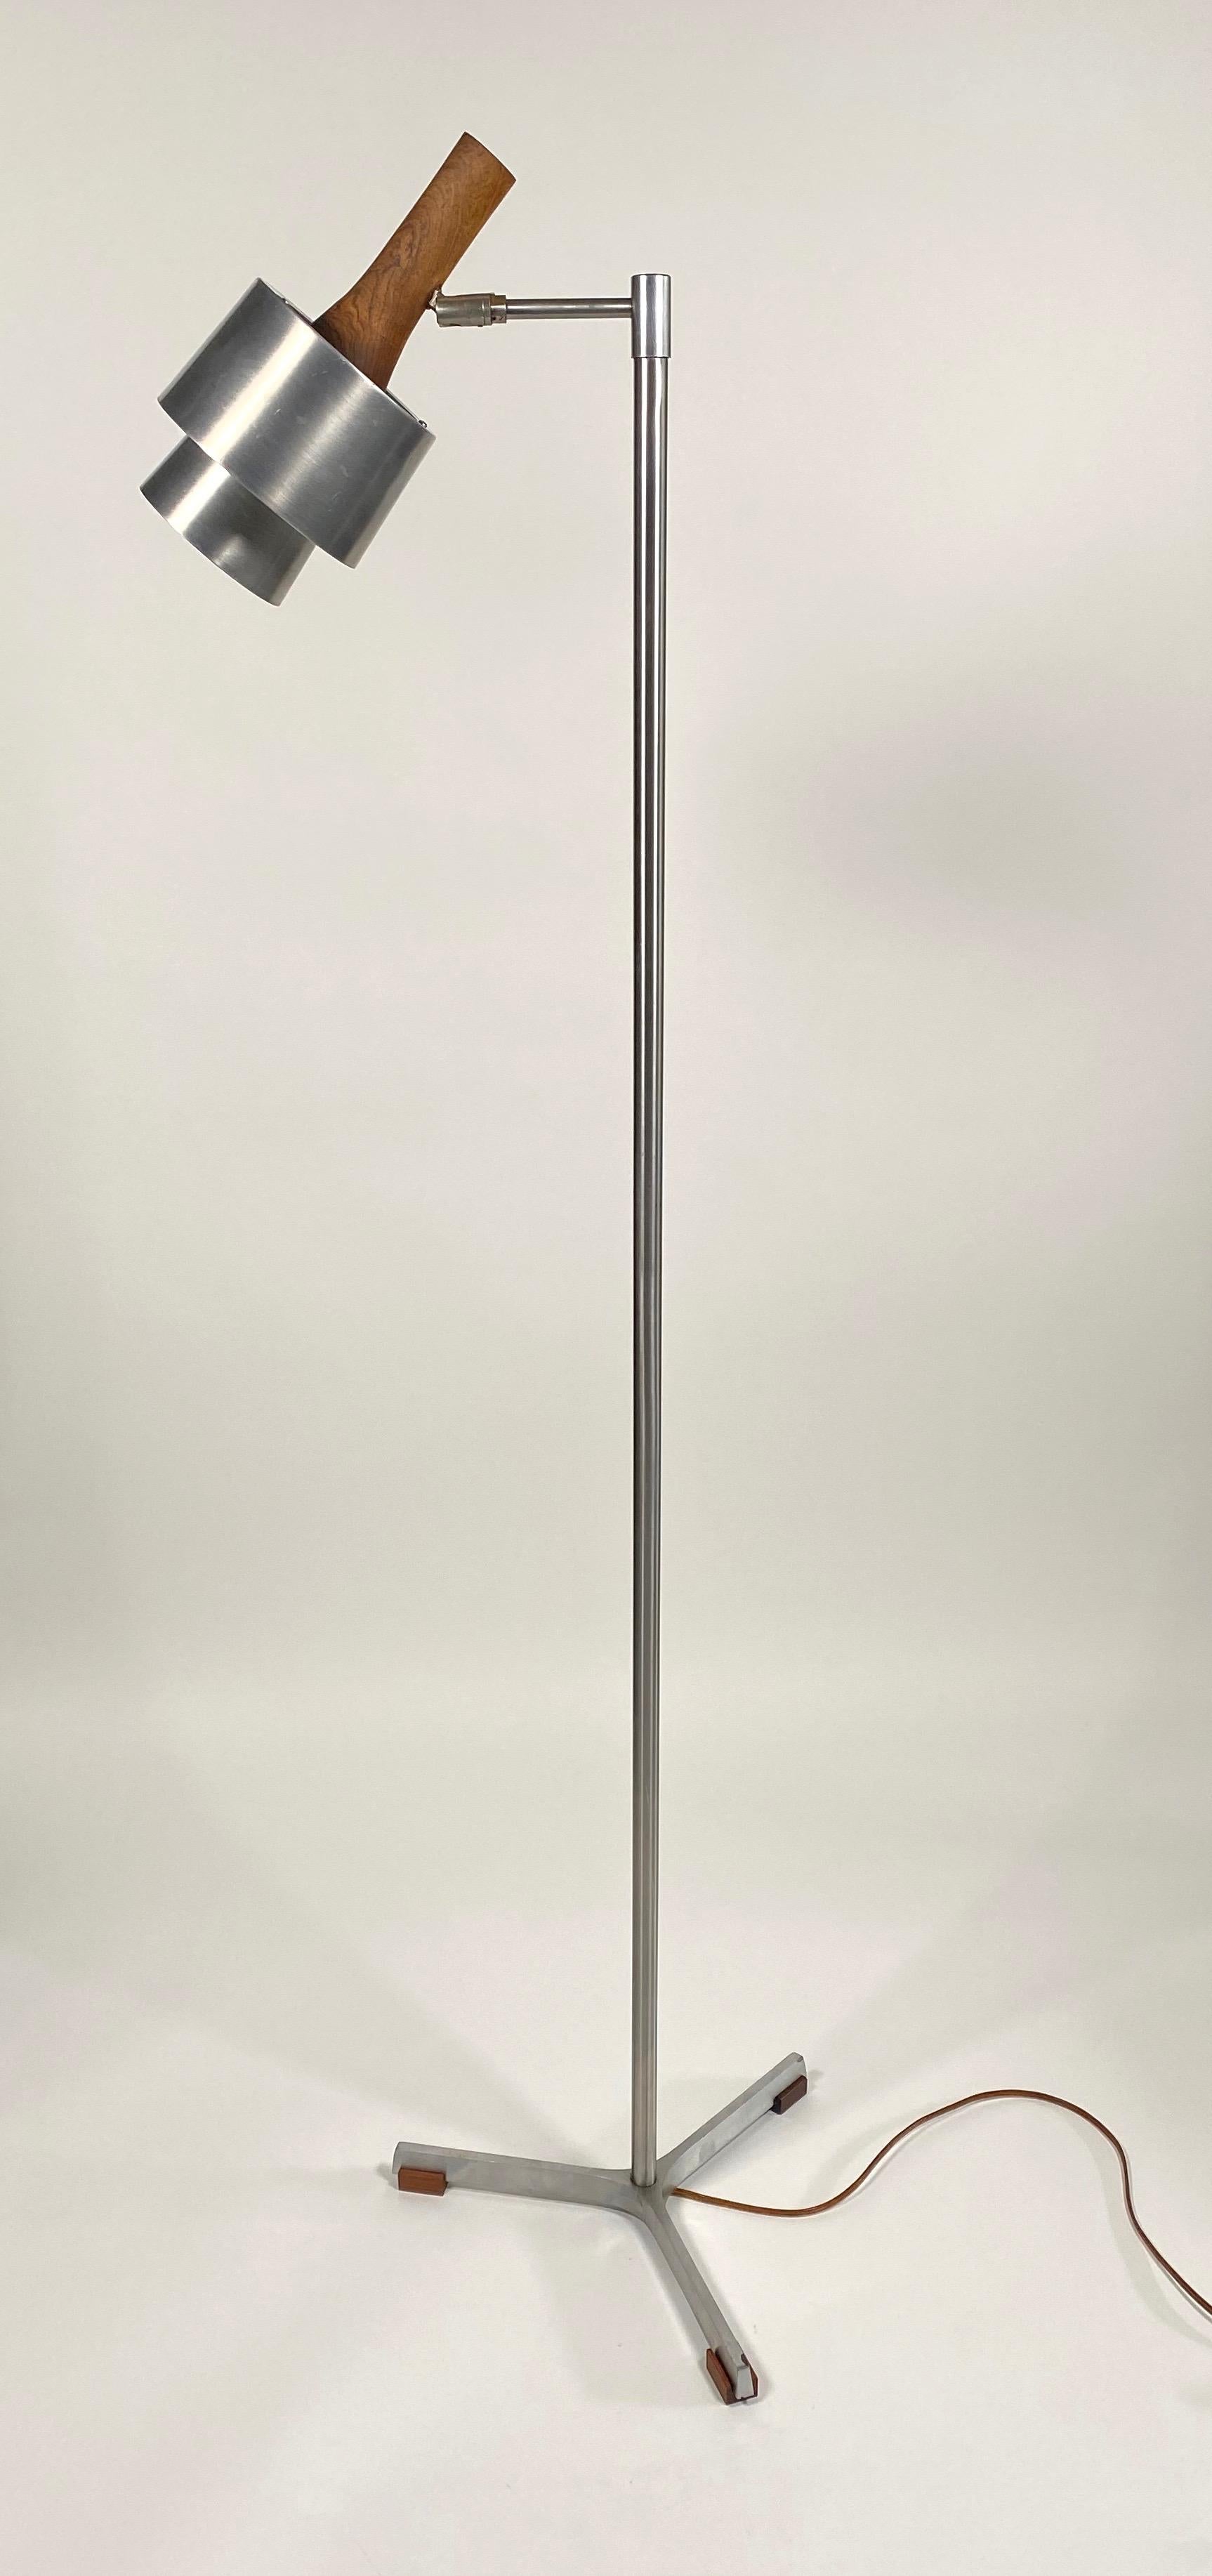 Floor lamp constructed of stainless steel, chromed steel, aluminum and rosewood. designed by Johannes (Jo) Hammerborg (1920-1982) an Industrial designer who attended the Academy of Applied Arts in Denmark and was the artistic director of Fog &